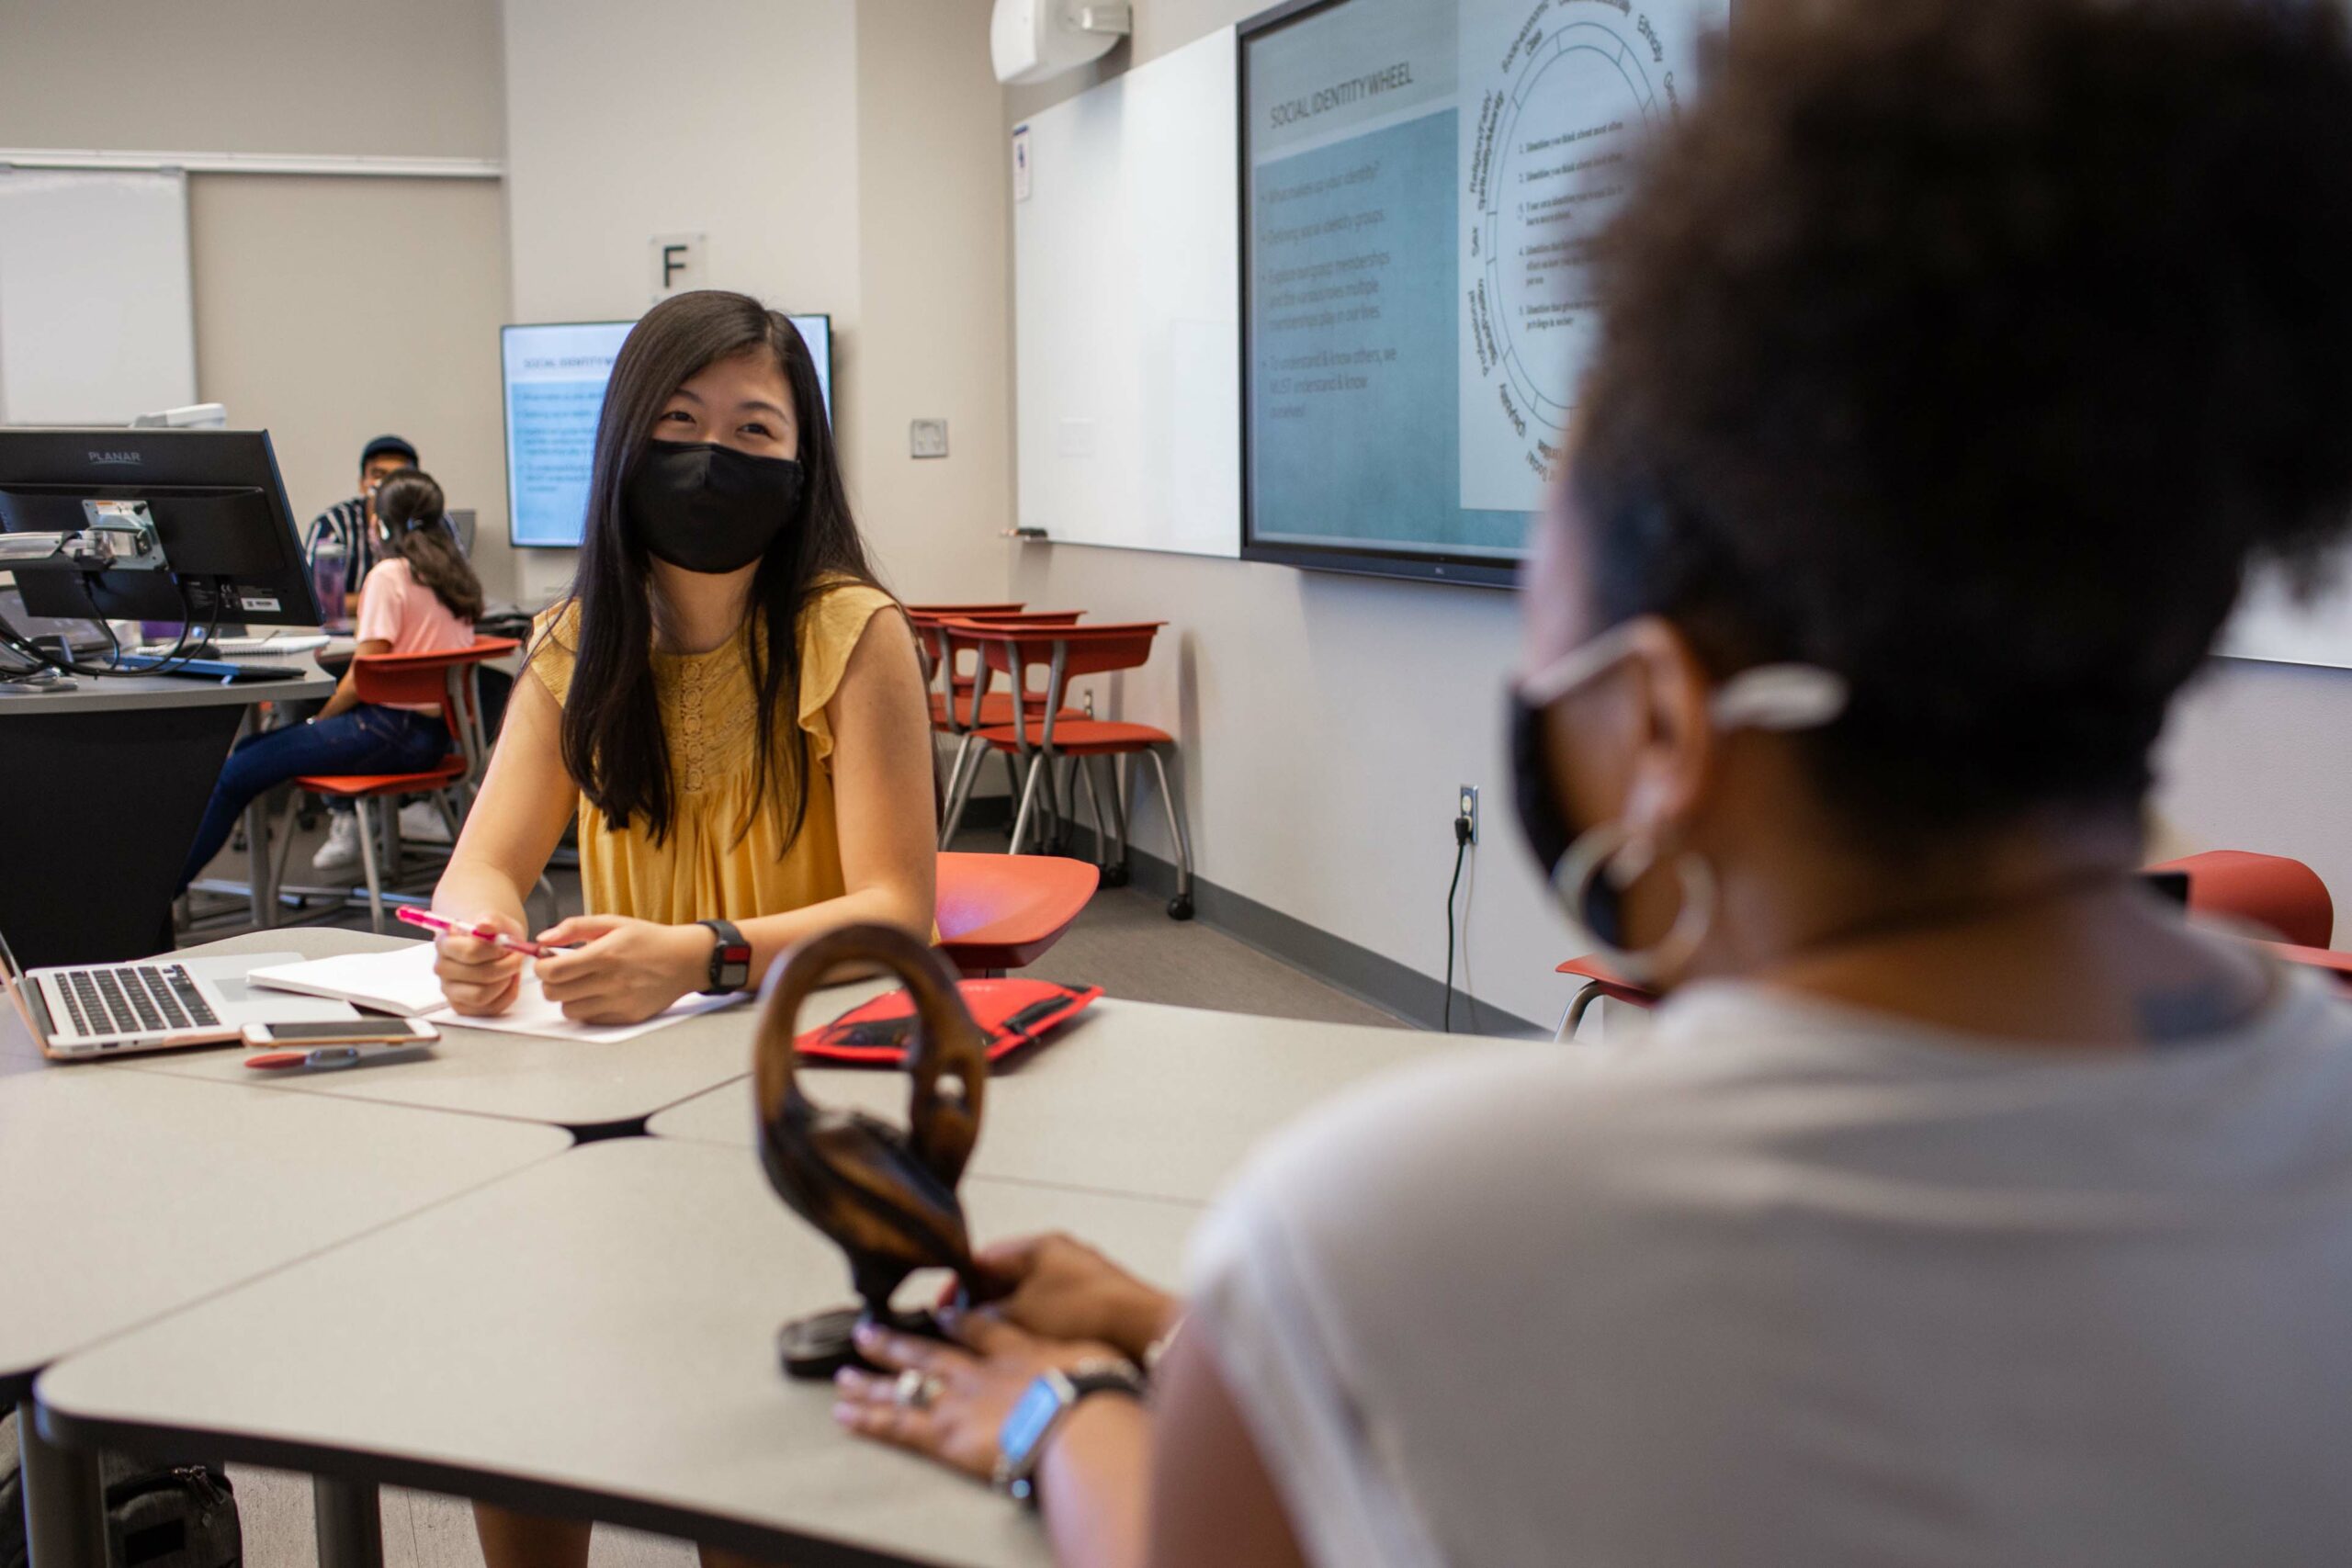 IUPUI students participate in a classroom photo shoot at ES 1117 on Thursday, August 13, 2020.  Physical-distancing guidelines were followed while capturing this photo.